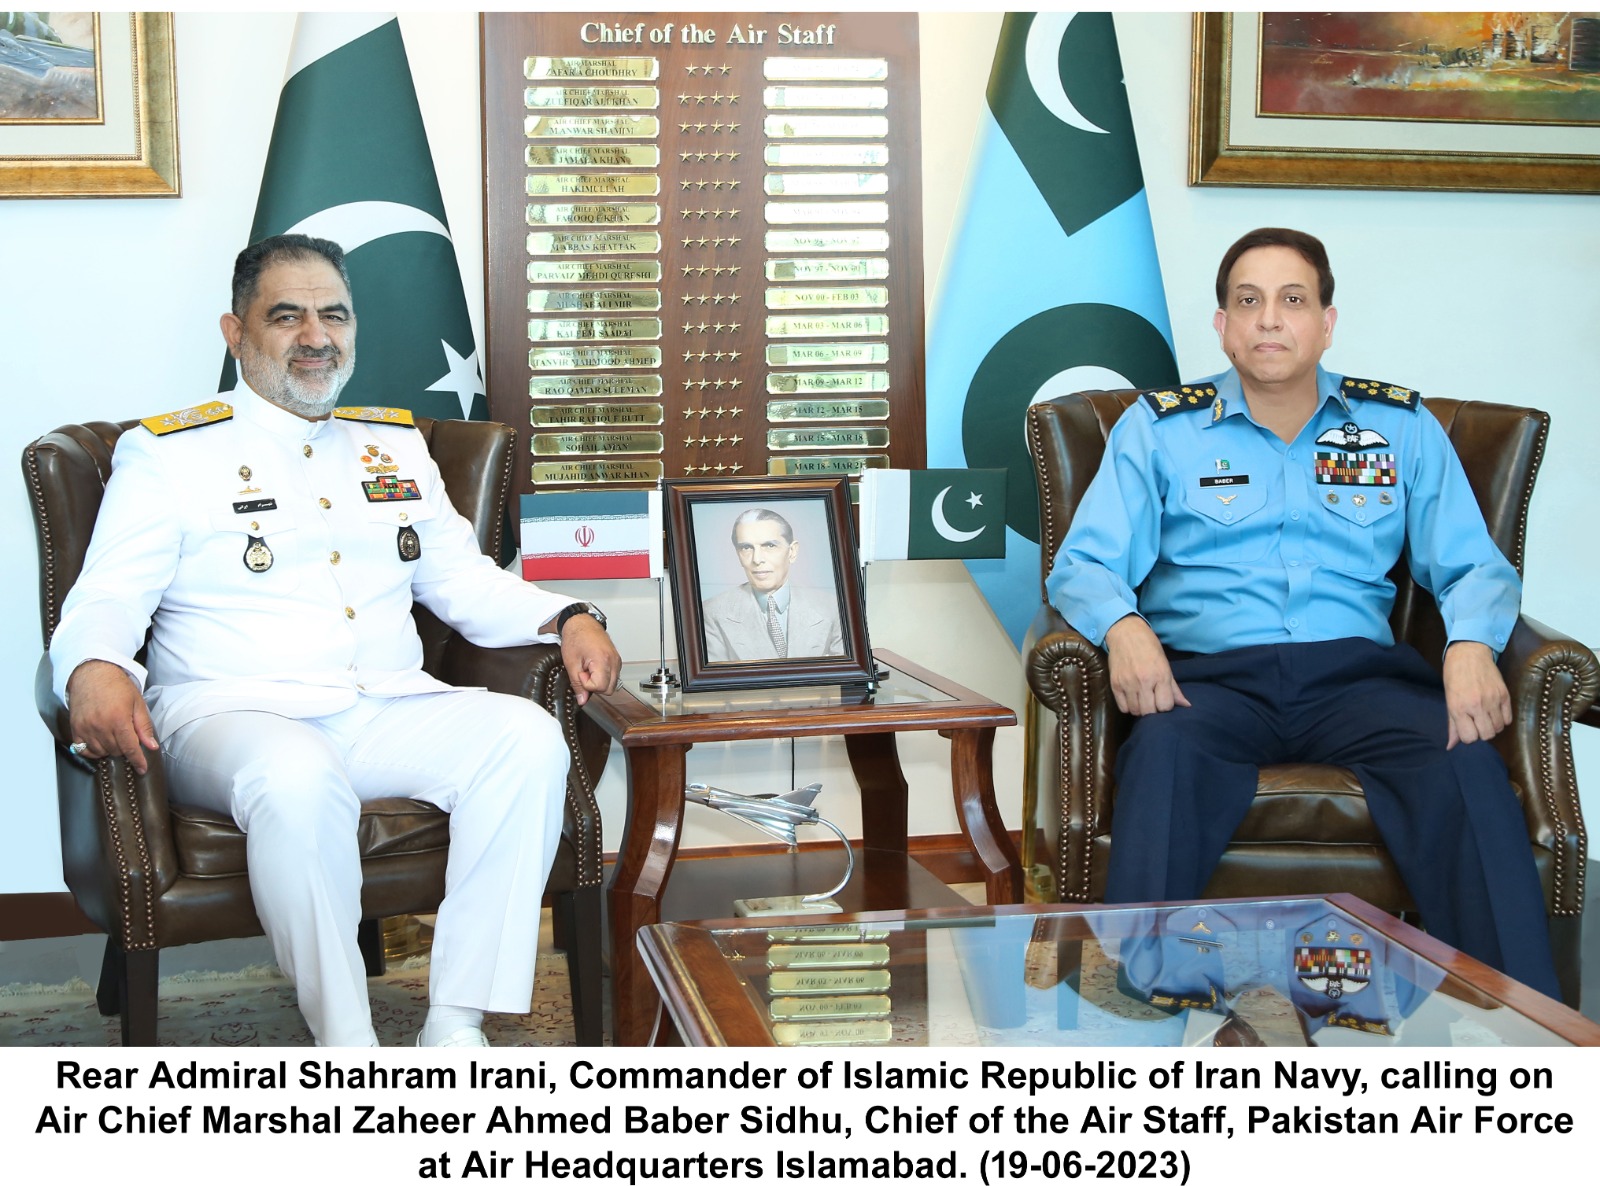 Commander Iranian Navy calls on Air Chief, lauds PAF professionalism